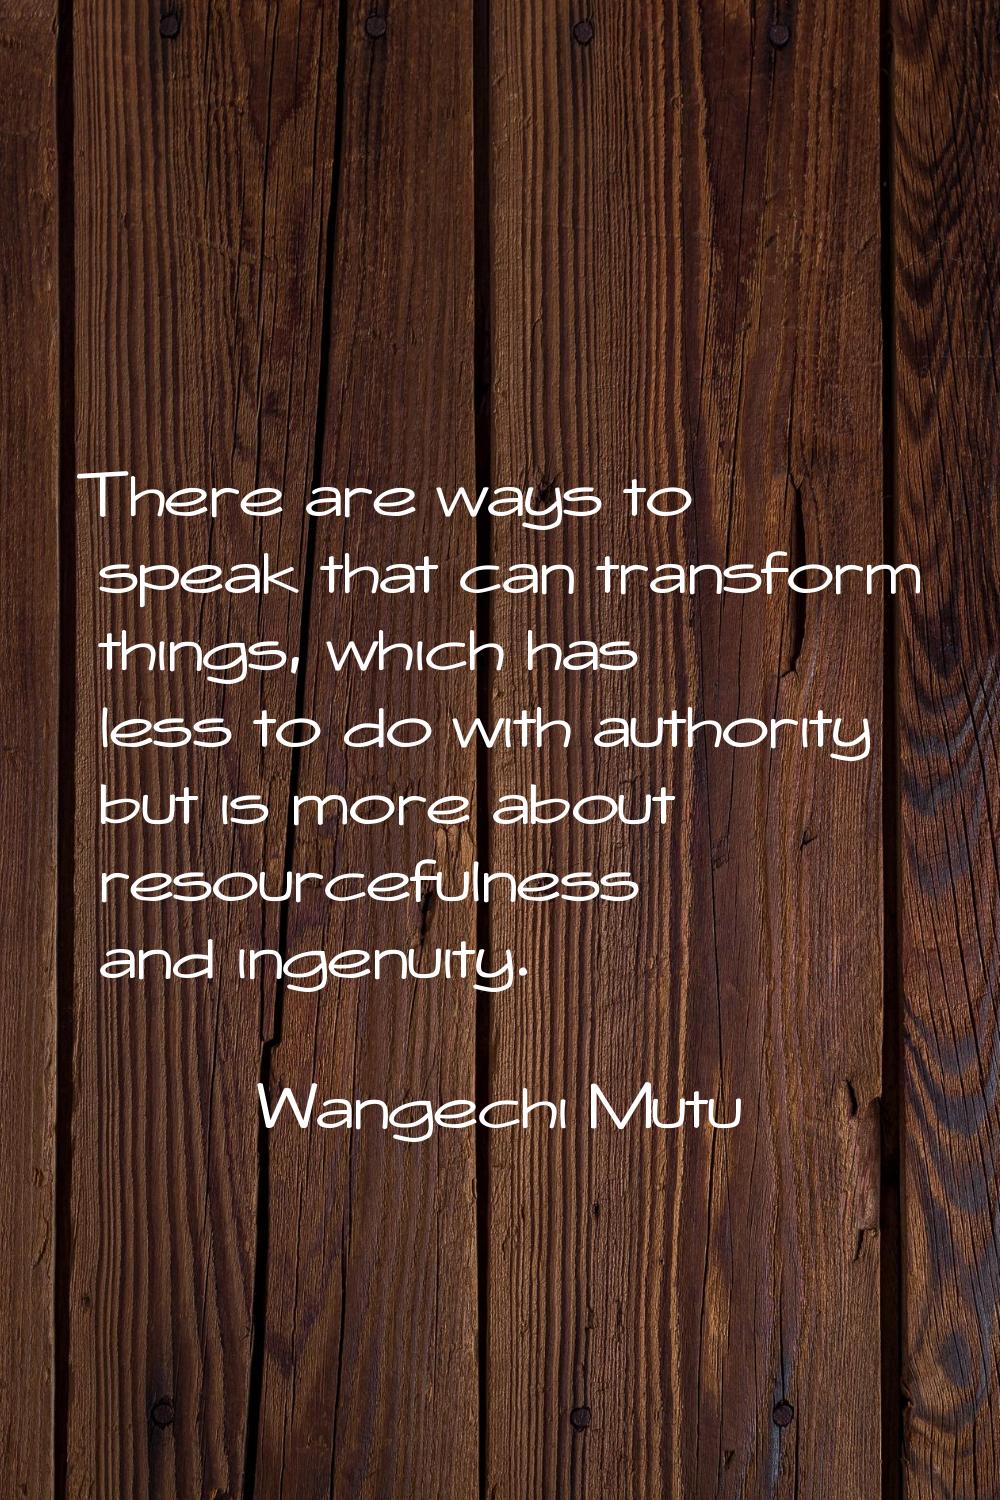 There are ways to speak that can transform things, which has less to do with authority but is more 